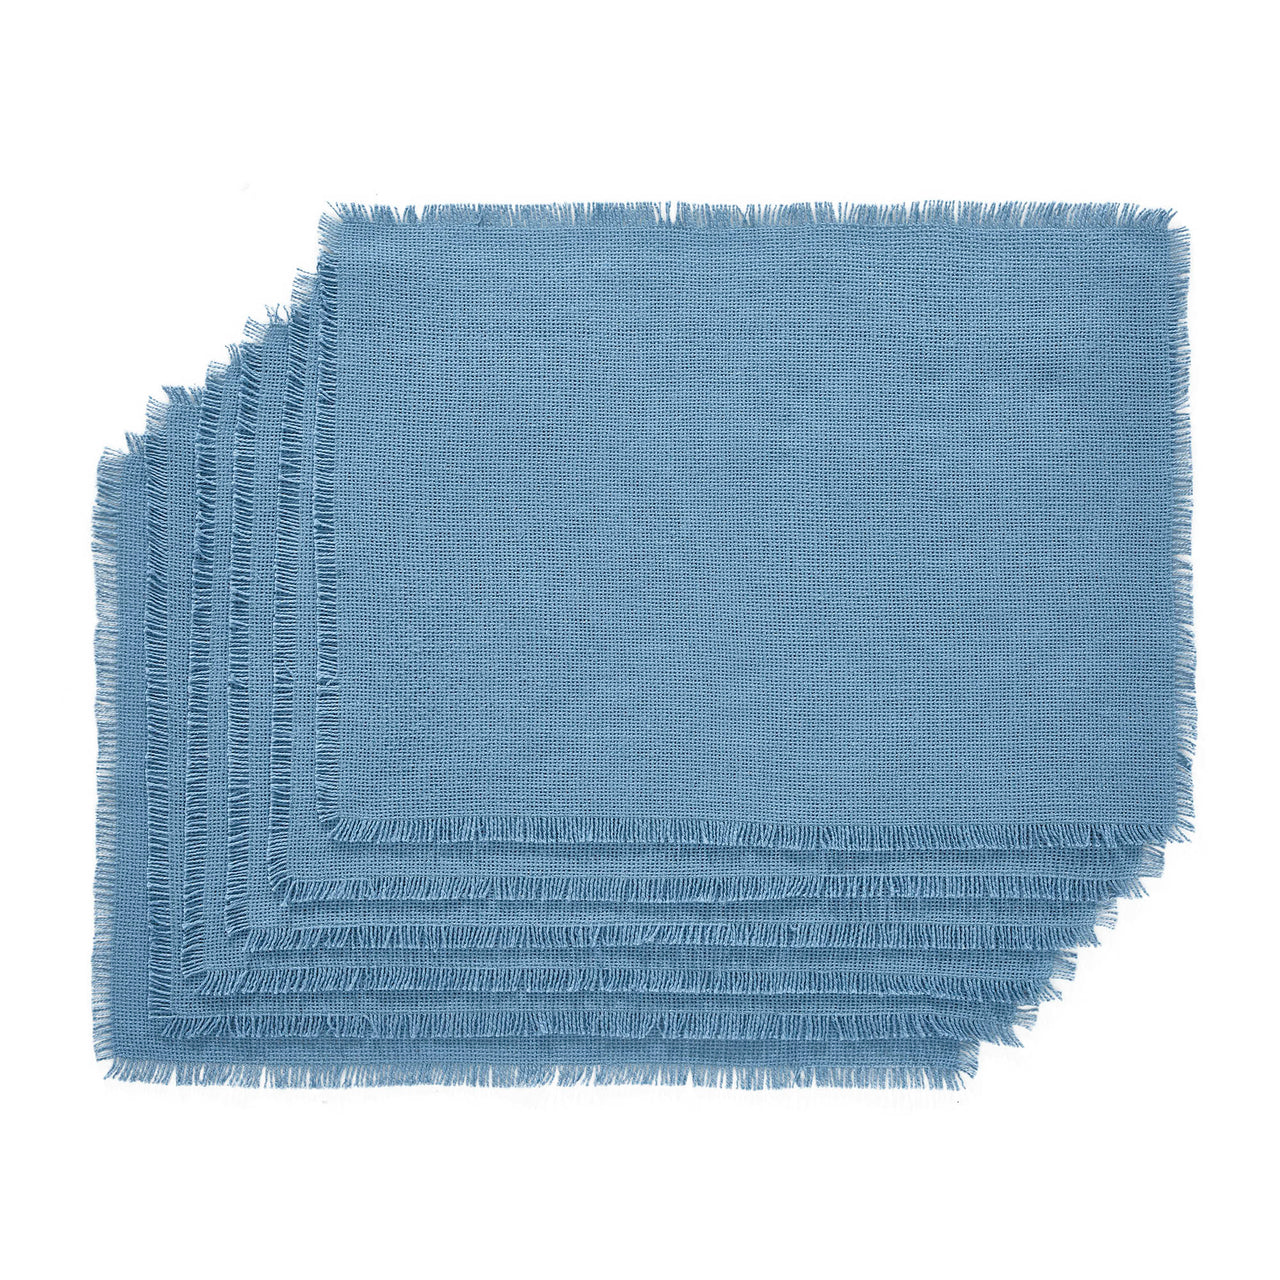 Burlap Blue Placemat Set of 6 Fringed 13"x19" VHC Brands